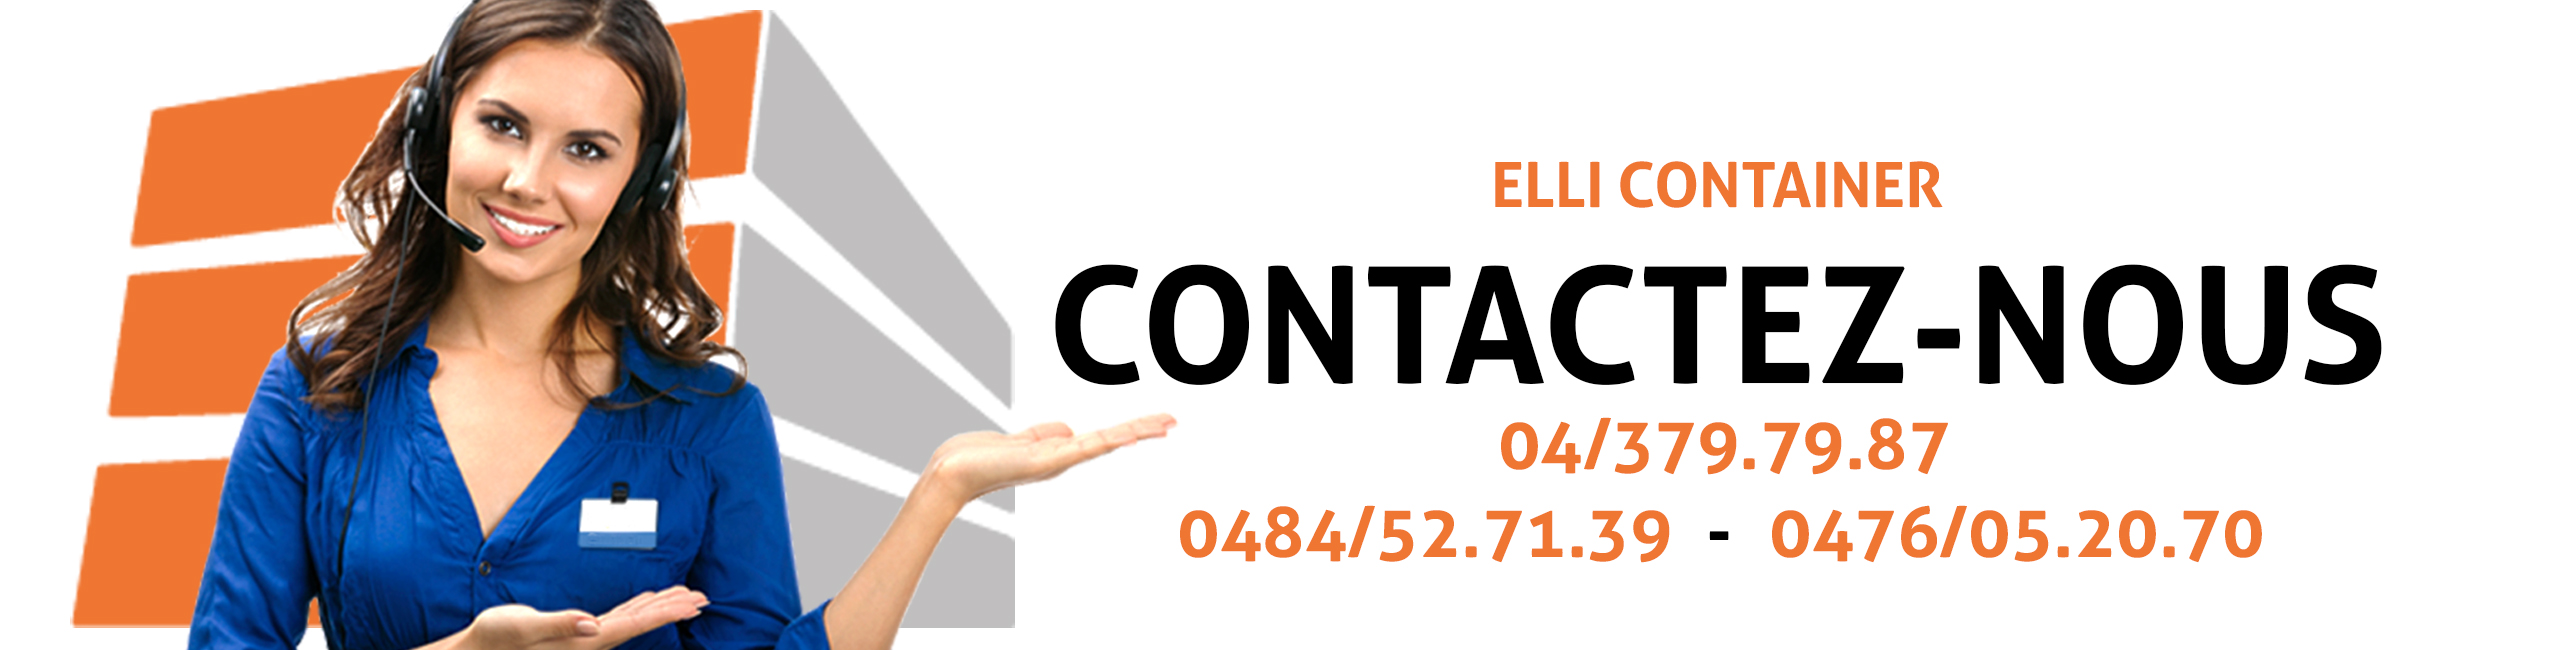 Elli Container - contact (banner)